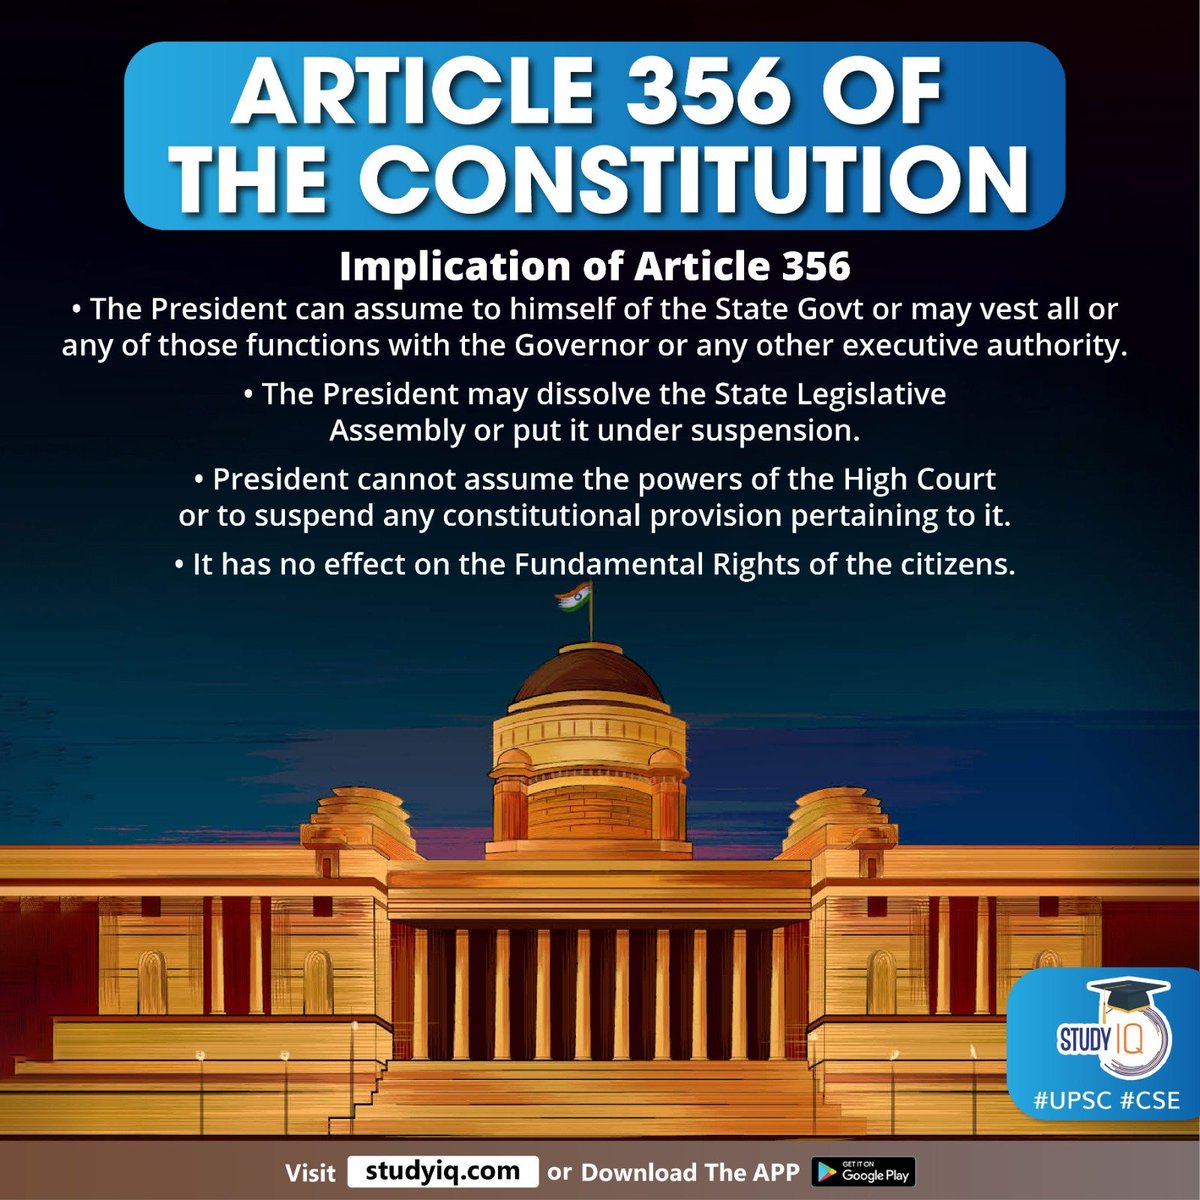 Article 356 of The Constitution

#article356 #indianconstitution #whyinnews #electedstategovernments #presidentrule #theconstitution #parliamentary #presidentsruleinstates #stategovt #indianpresident #highcourt #constitutionalprovision #fundamentalrights #citizensrights #upsc